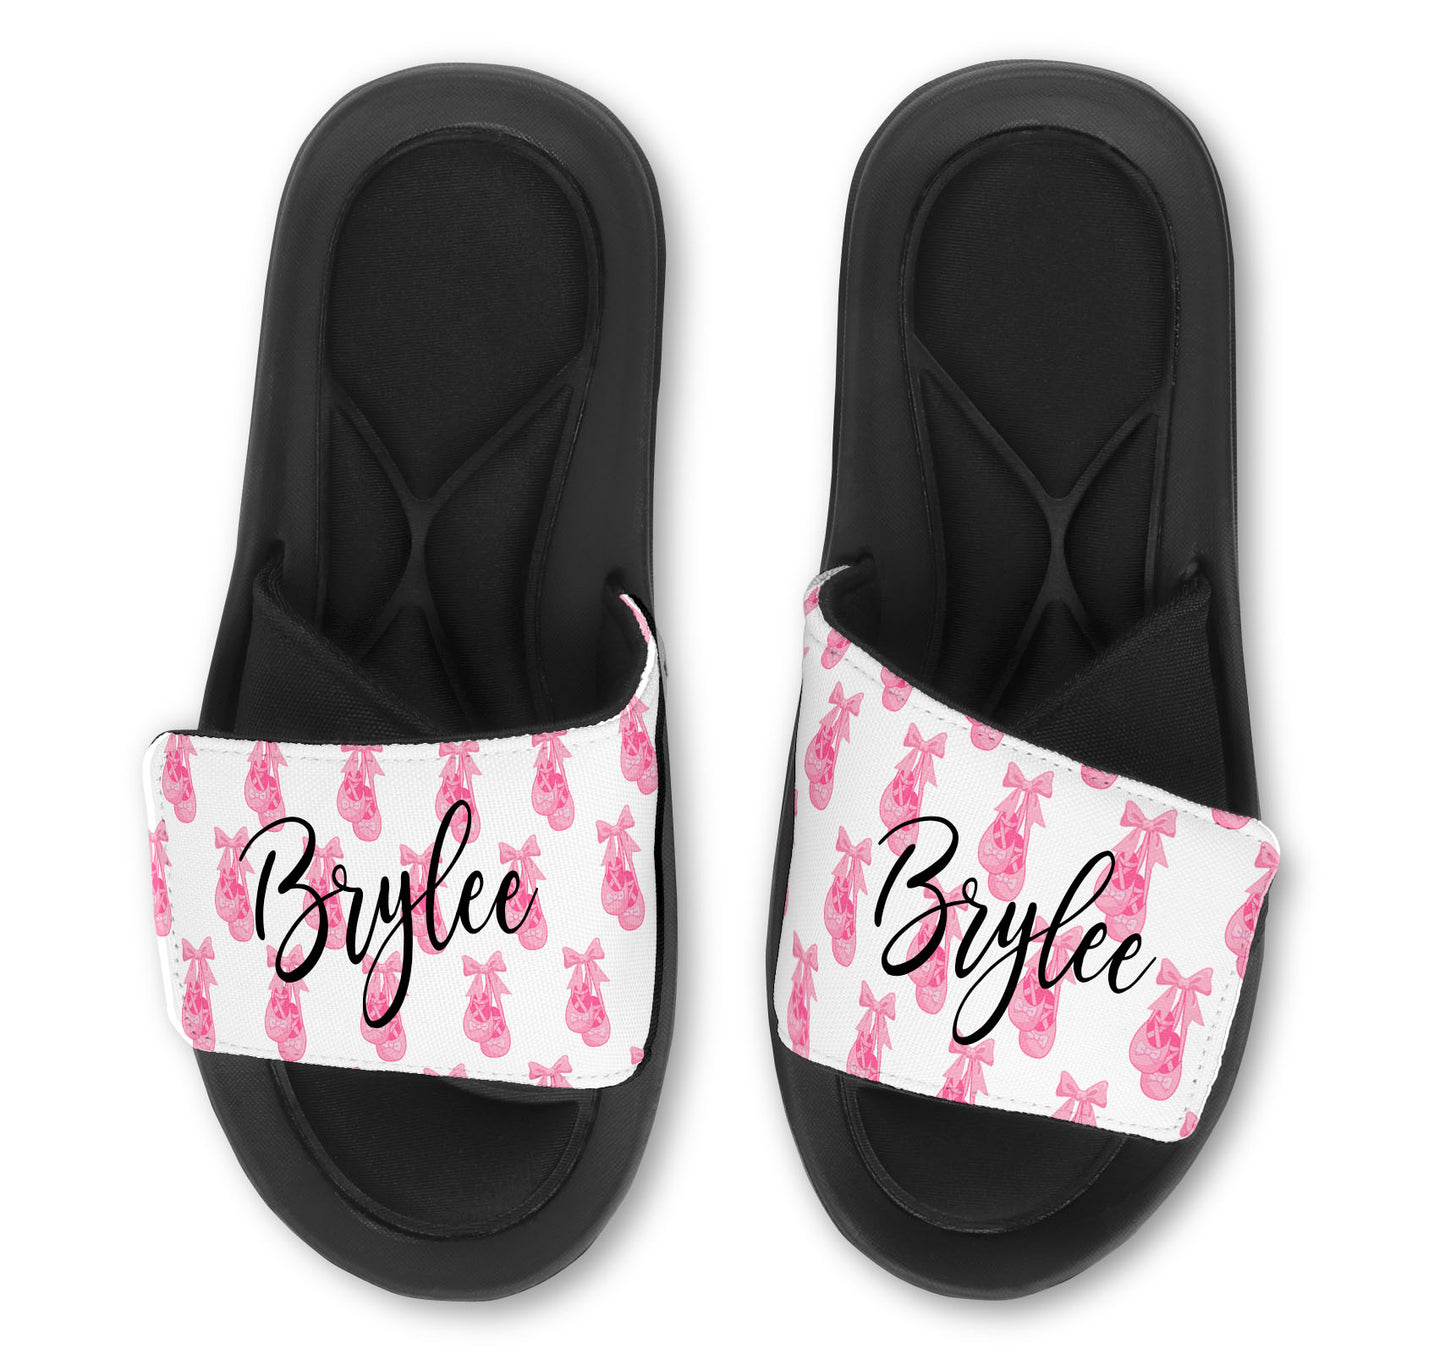 Ballet Dance Slides - Customize with Your Name